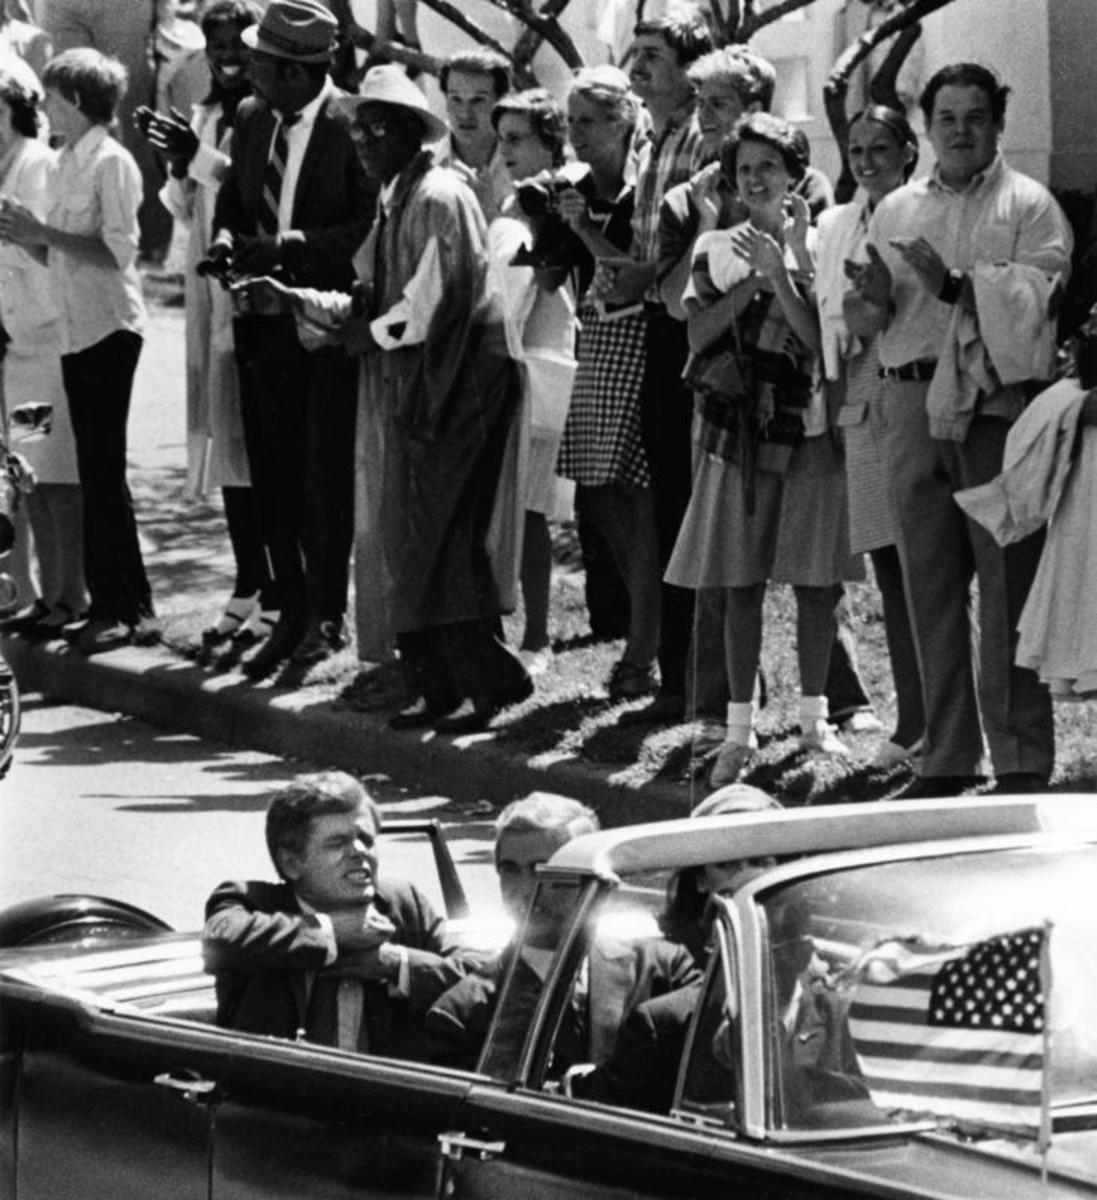 Notice President Kennedys Hands In This Photo. He Has Just Been Shot In This Photo. 